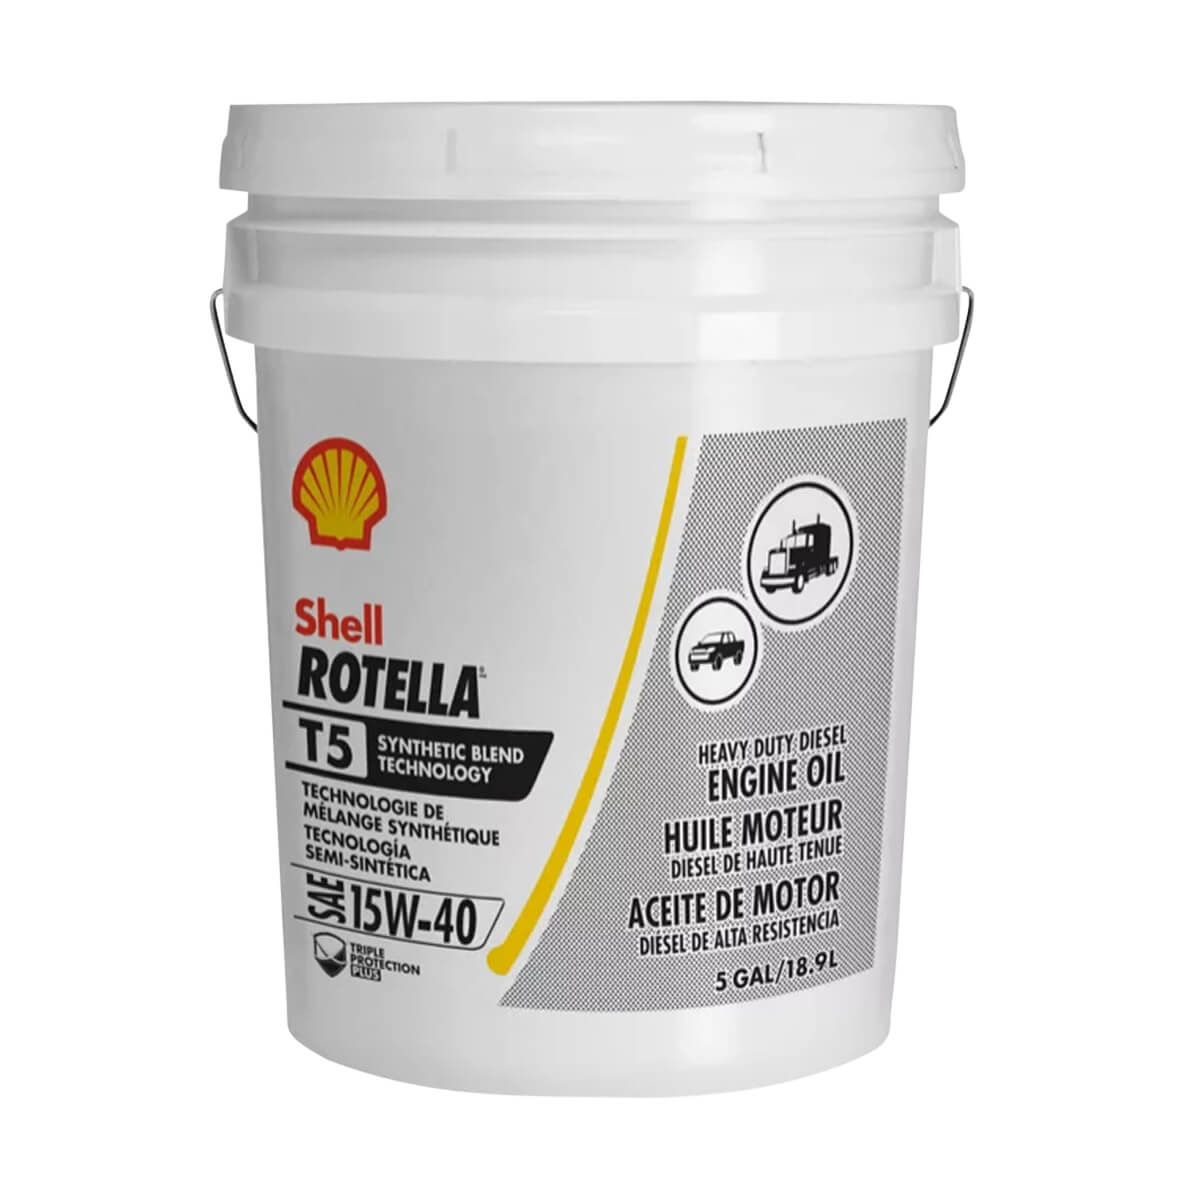 Shell Rotella T5 Triple Protection Synthetic Diesel 15W-40 - 18.9 L